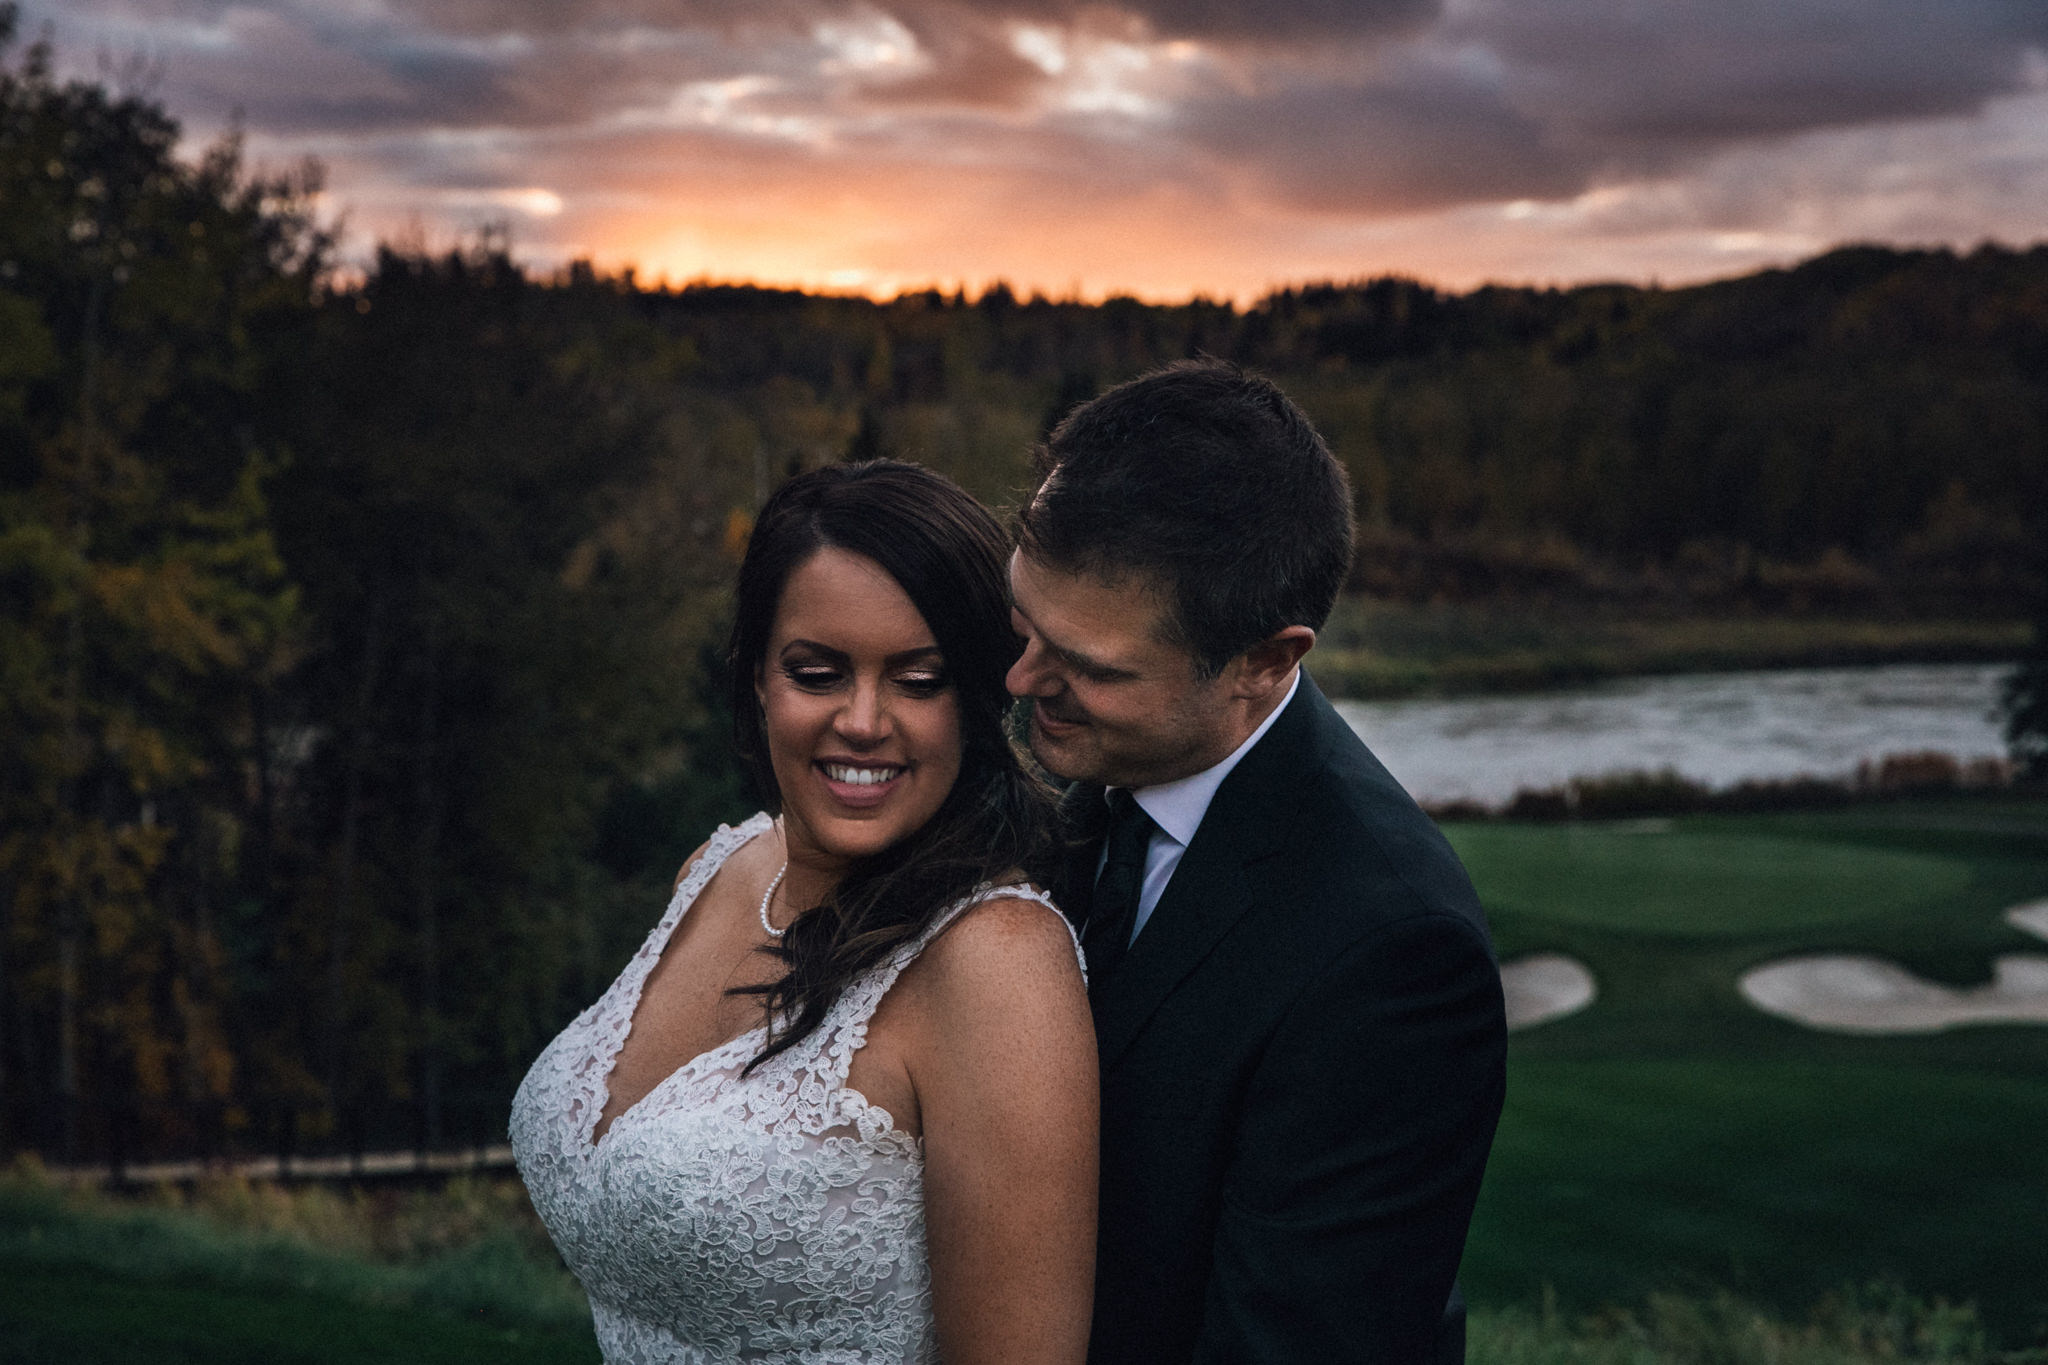 windermere golf and country club wedding